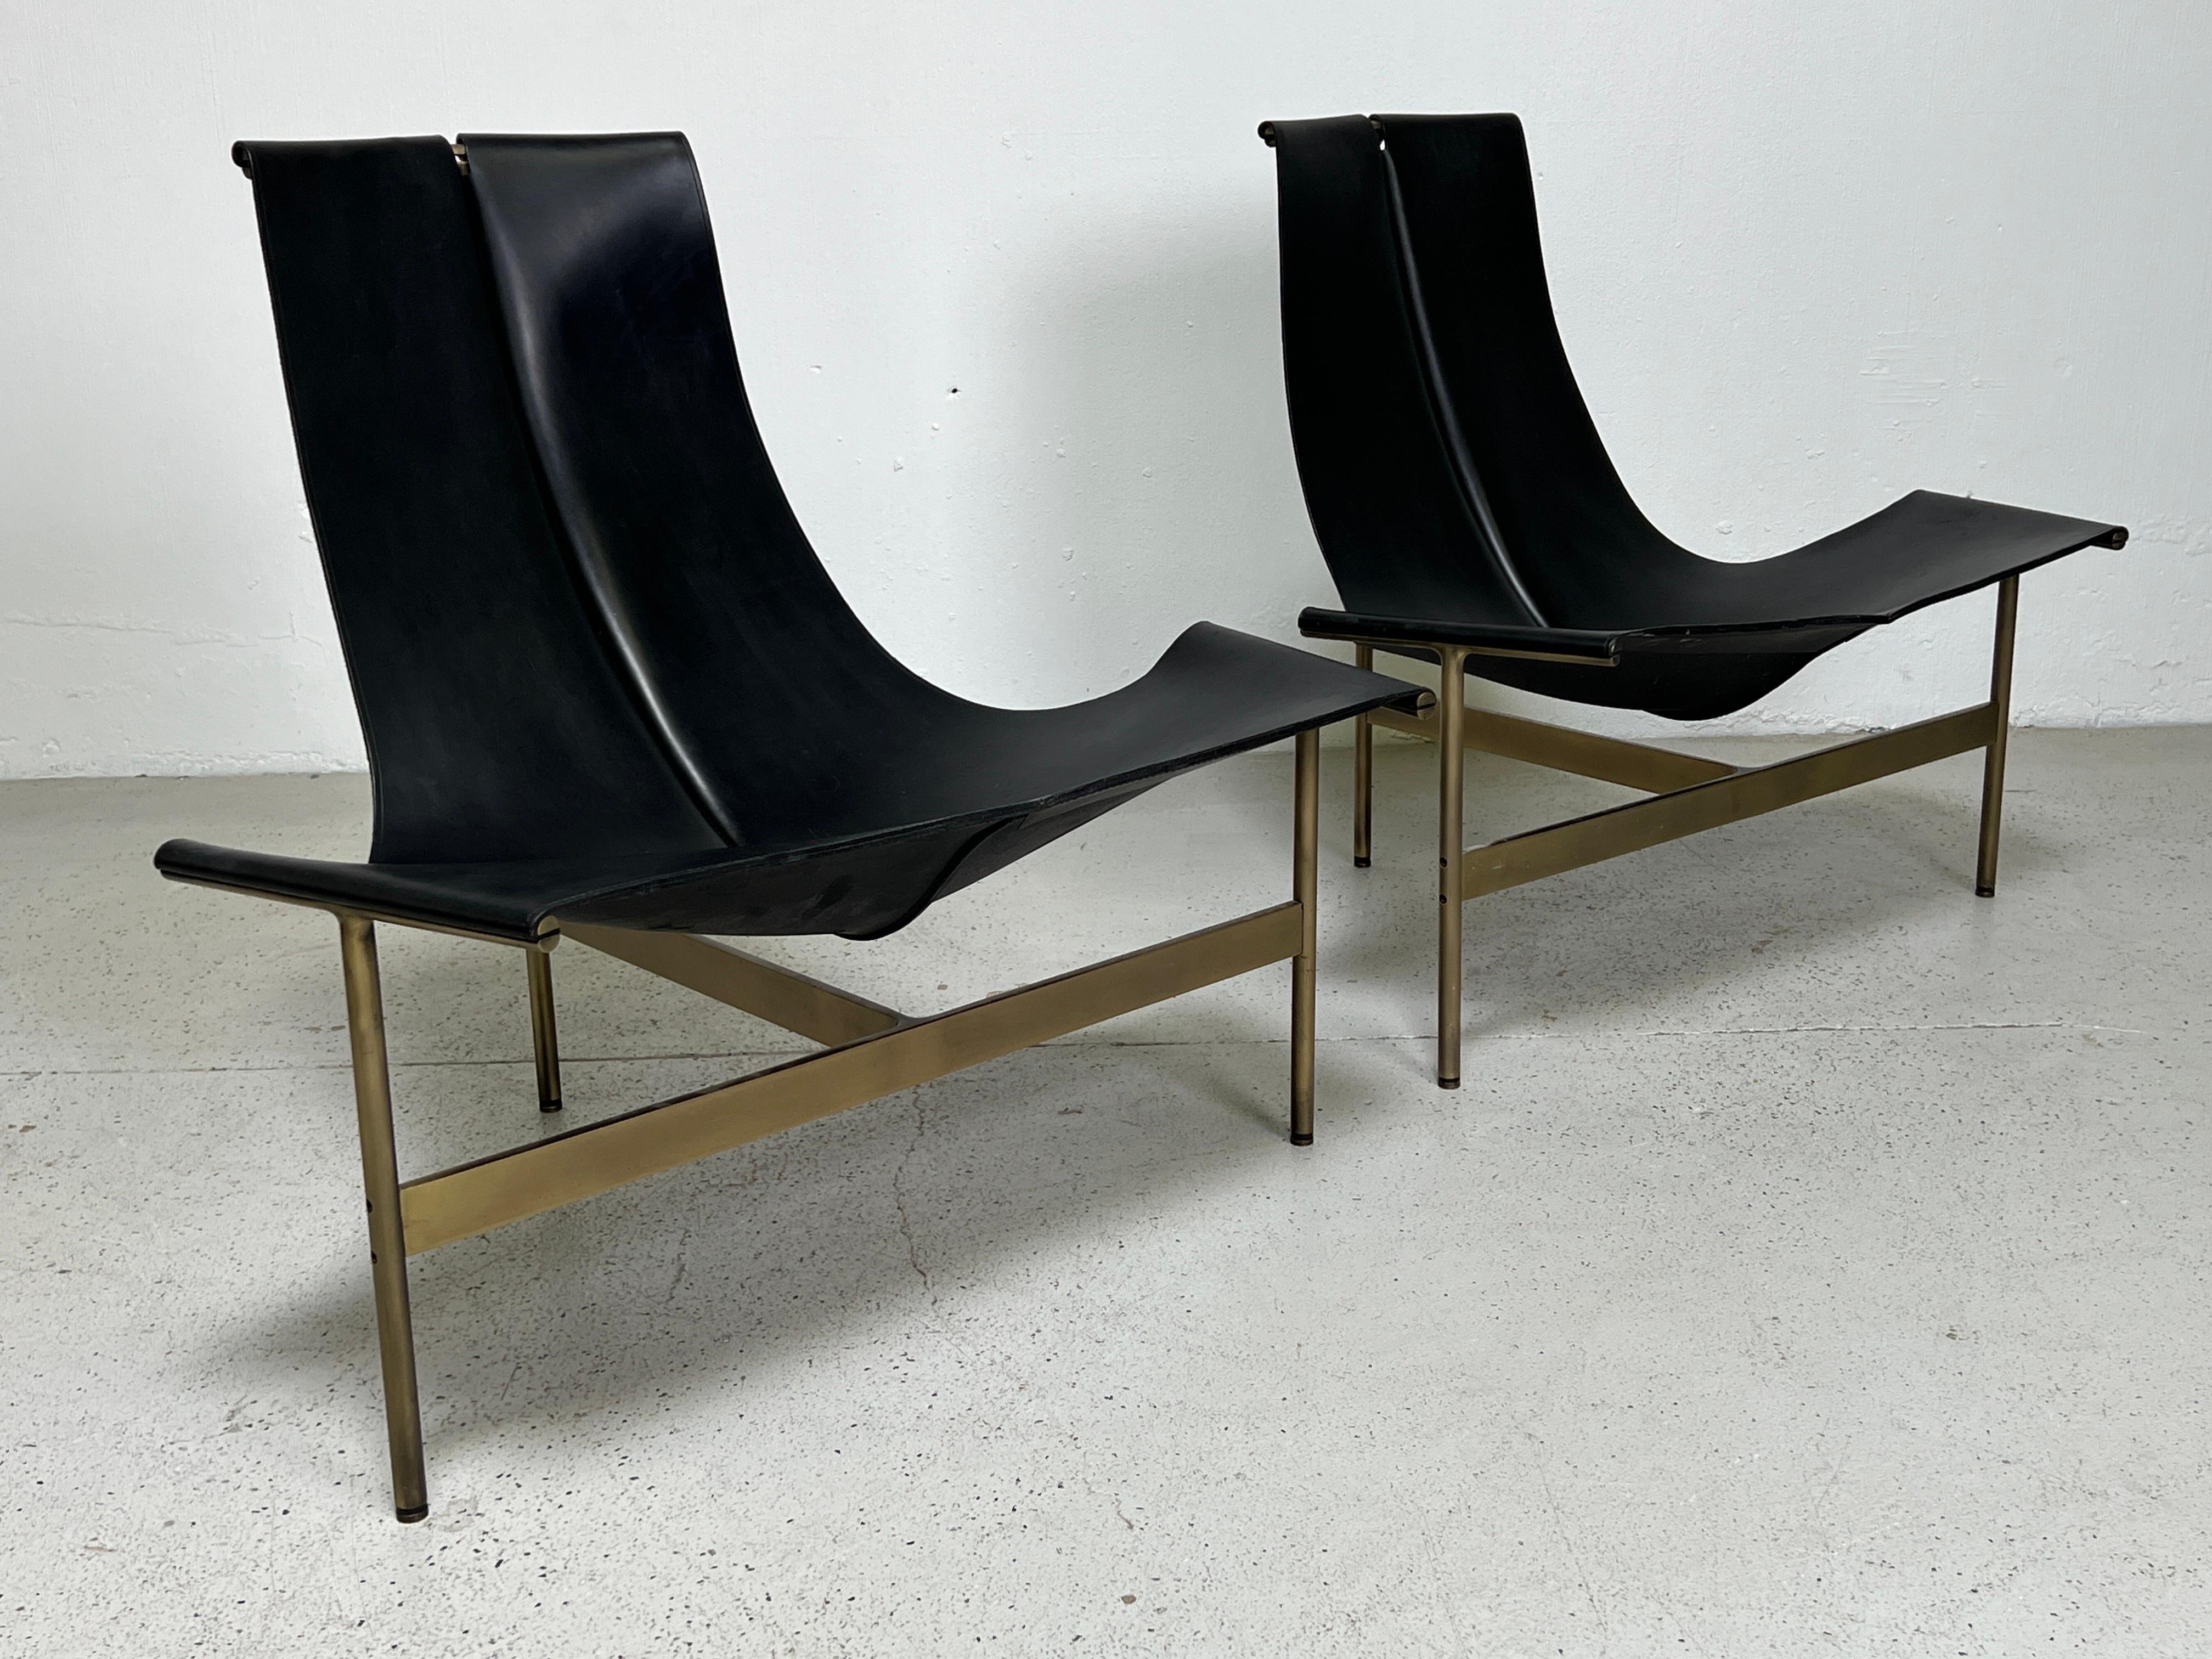 Pair of Bronze TG-15 Lounge Chair by Katavolos, Littell, & Kelley For Sale 10